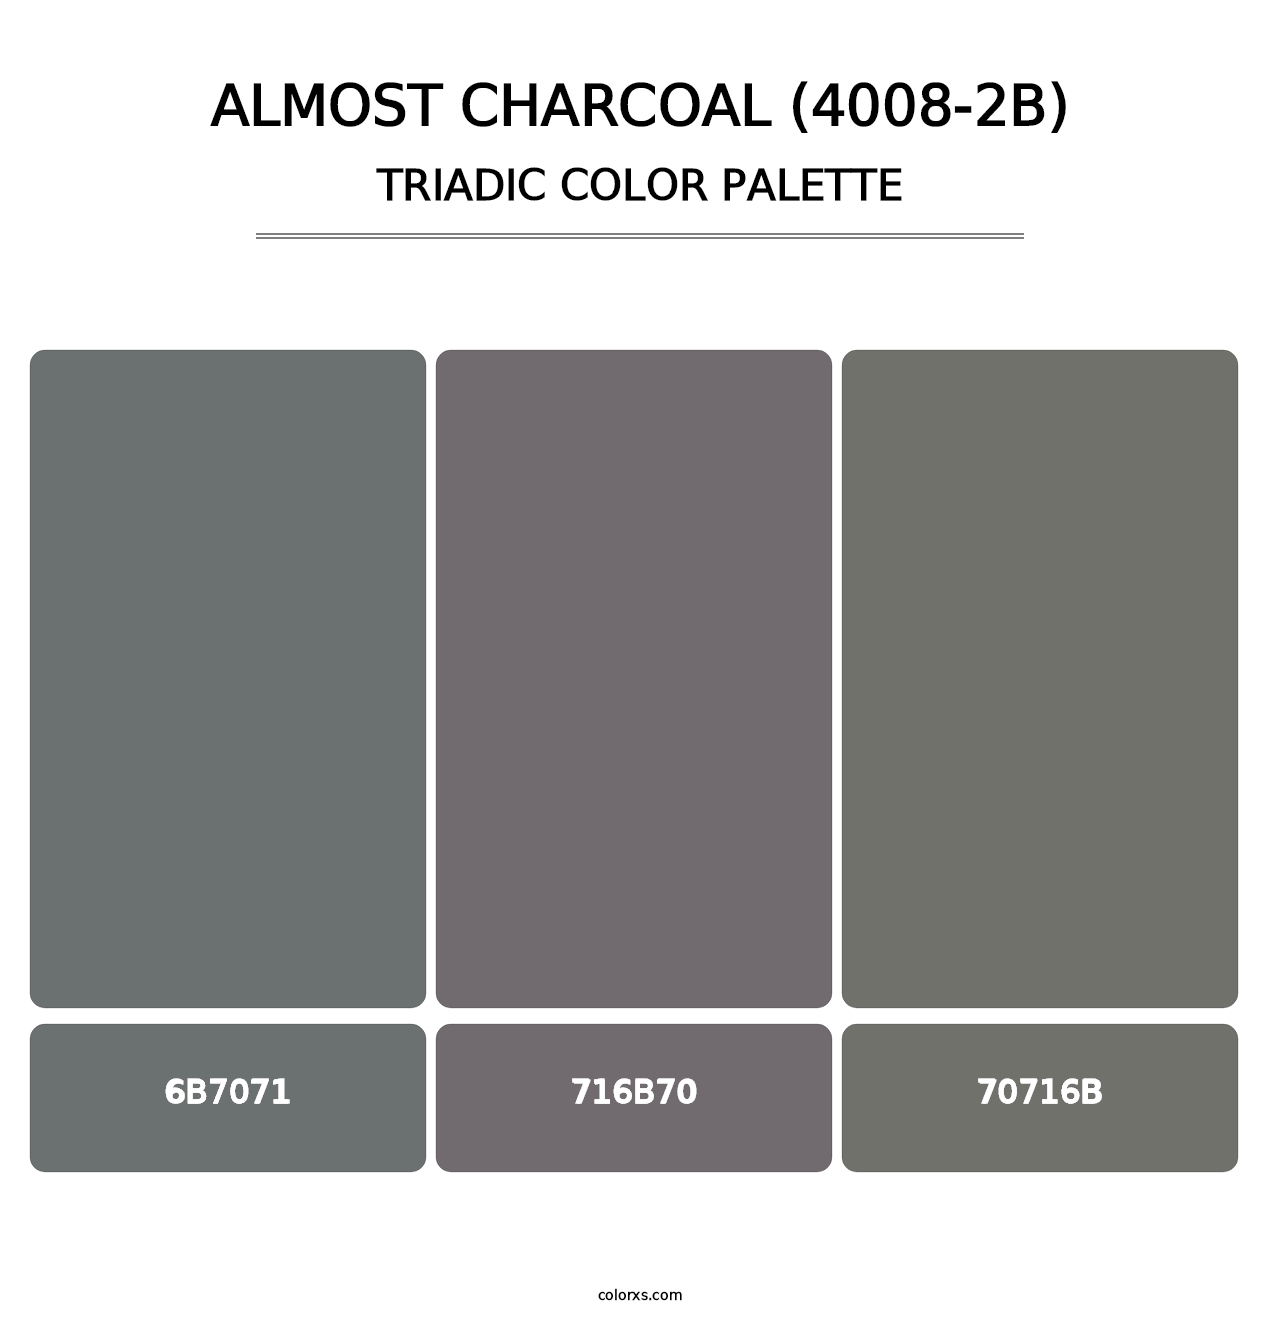 Almost Charcoal (4008-2B) - Triadic Color Palette